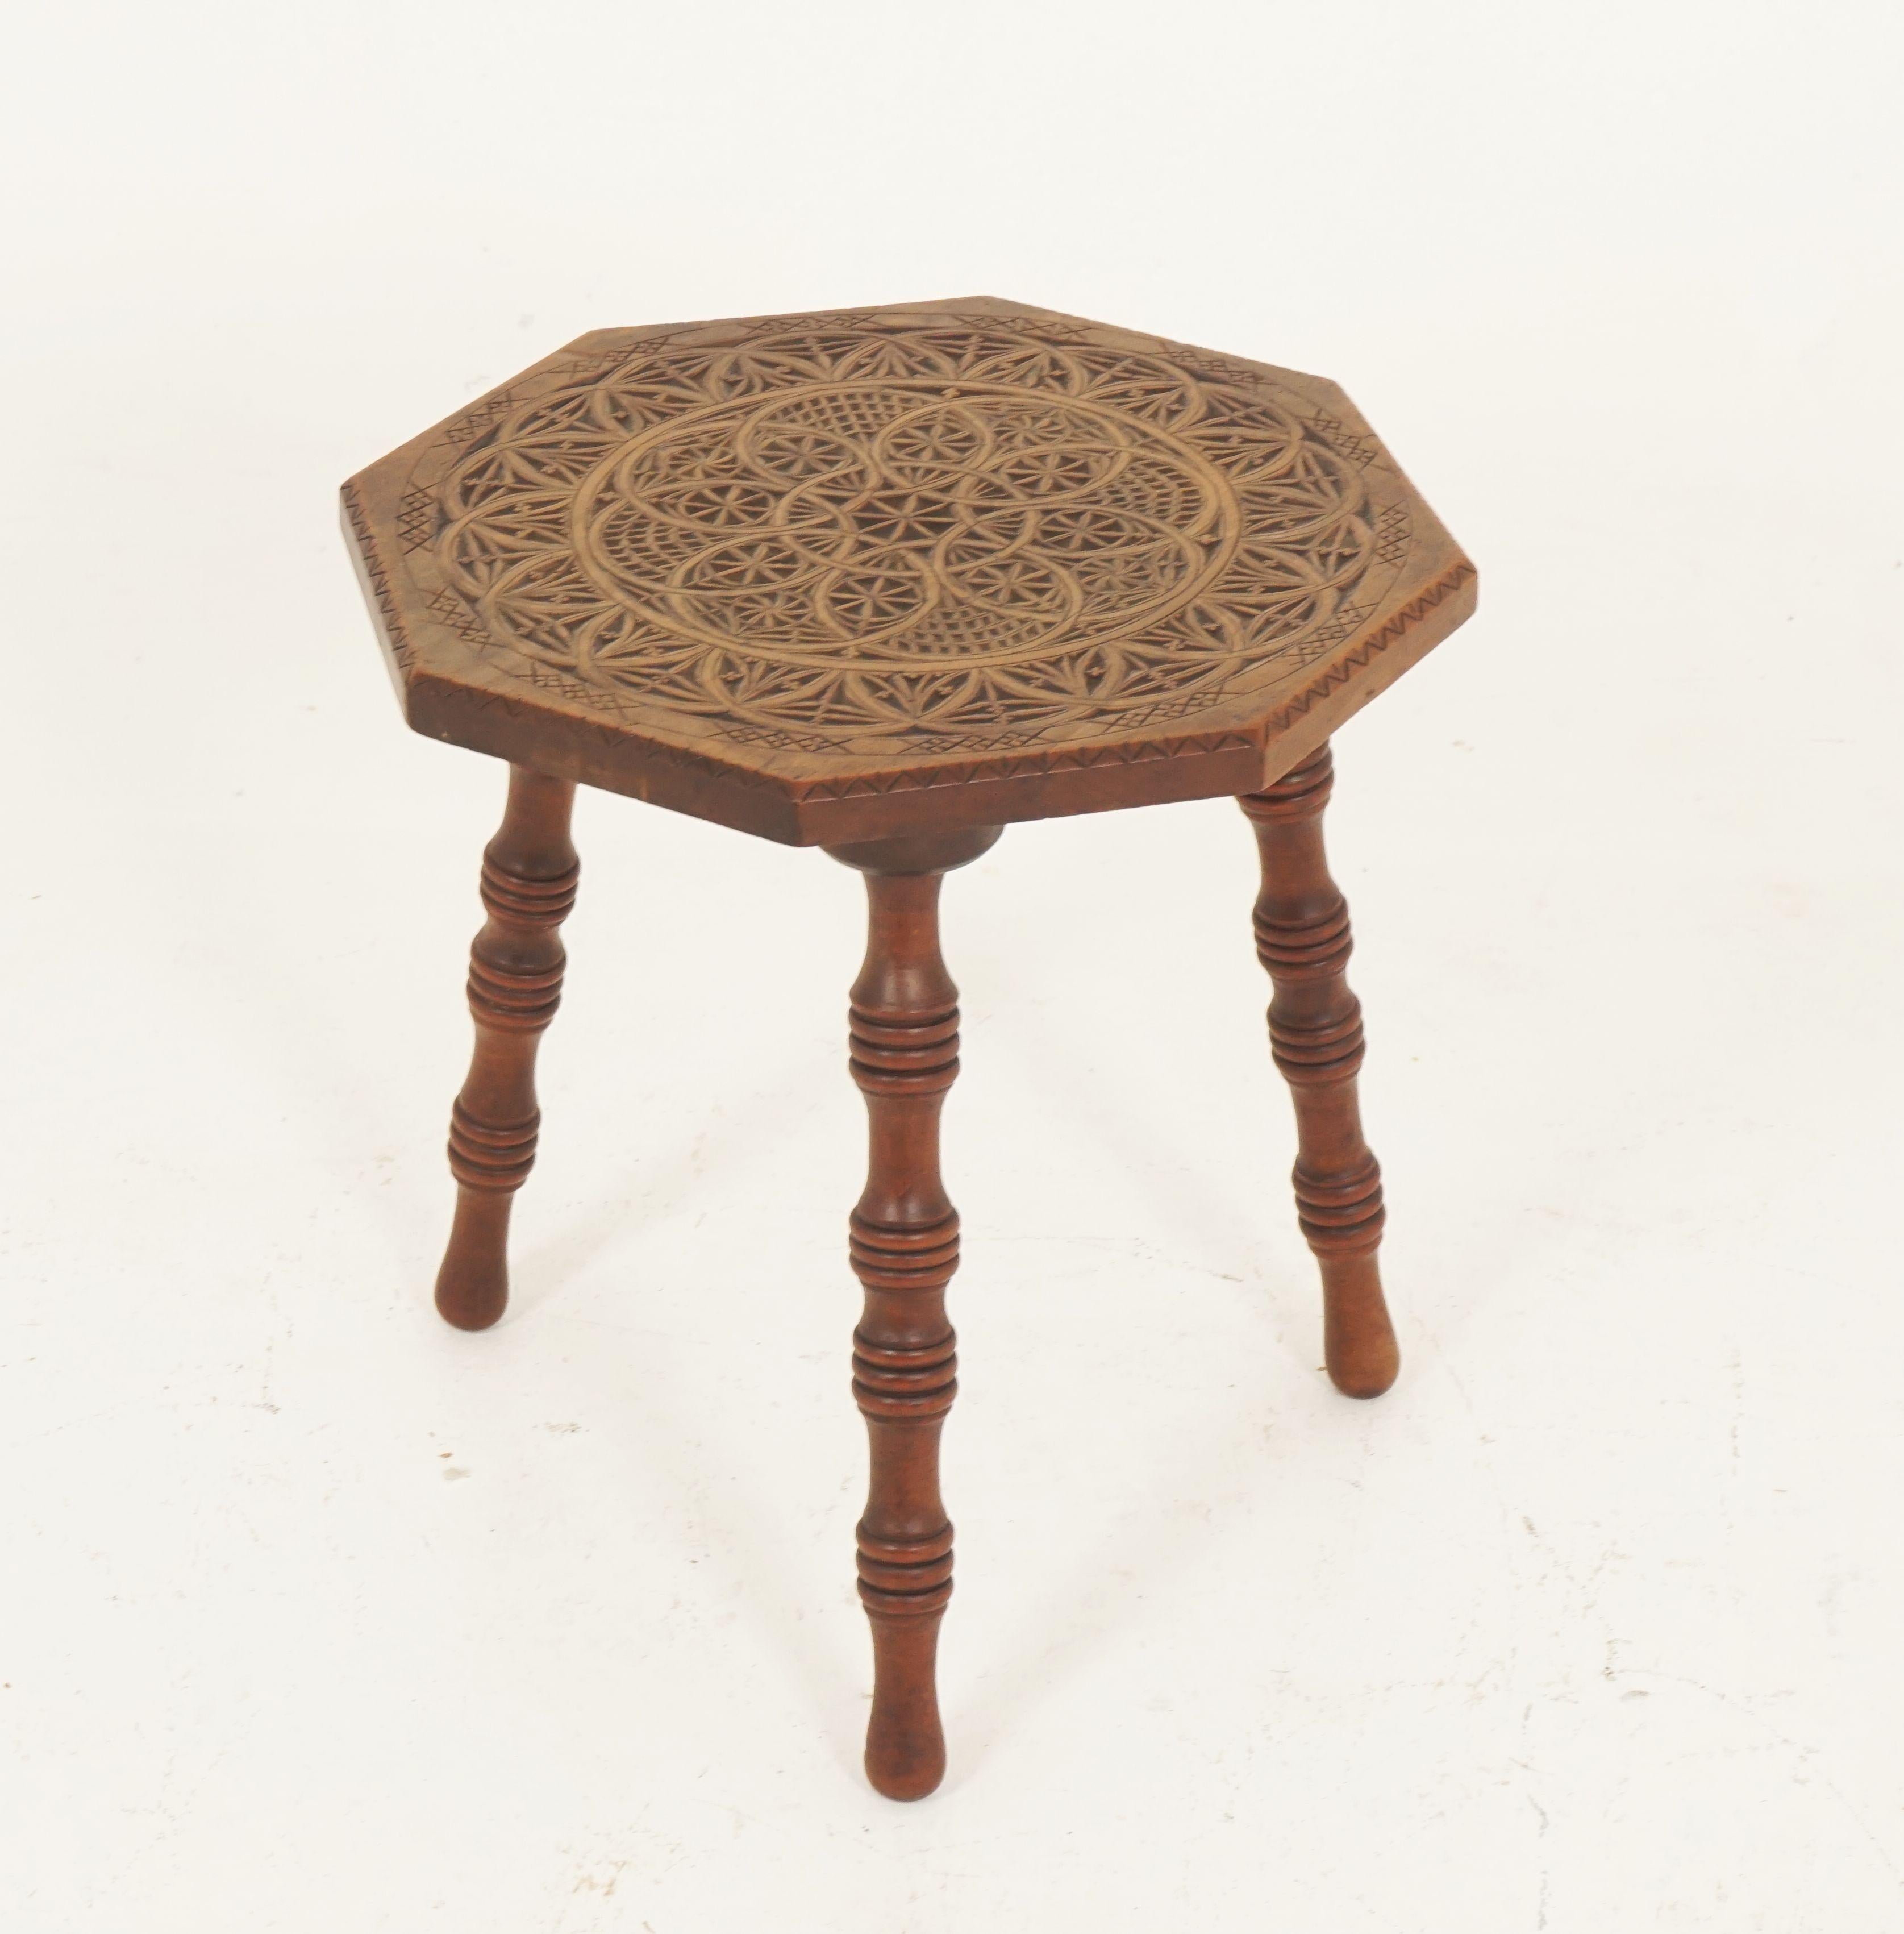 Antique Victorian walnut octagonal stool, chip carved, 3 legged, Scotland 1890, B2359

Scotland, 1890
Solid walnut
Original finish
Octangular carved top with moulded edge
Stand on three turned four ring legs
Wonderful carving to the top
All